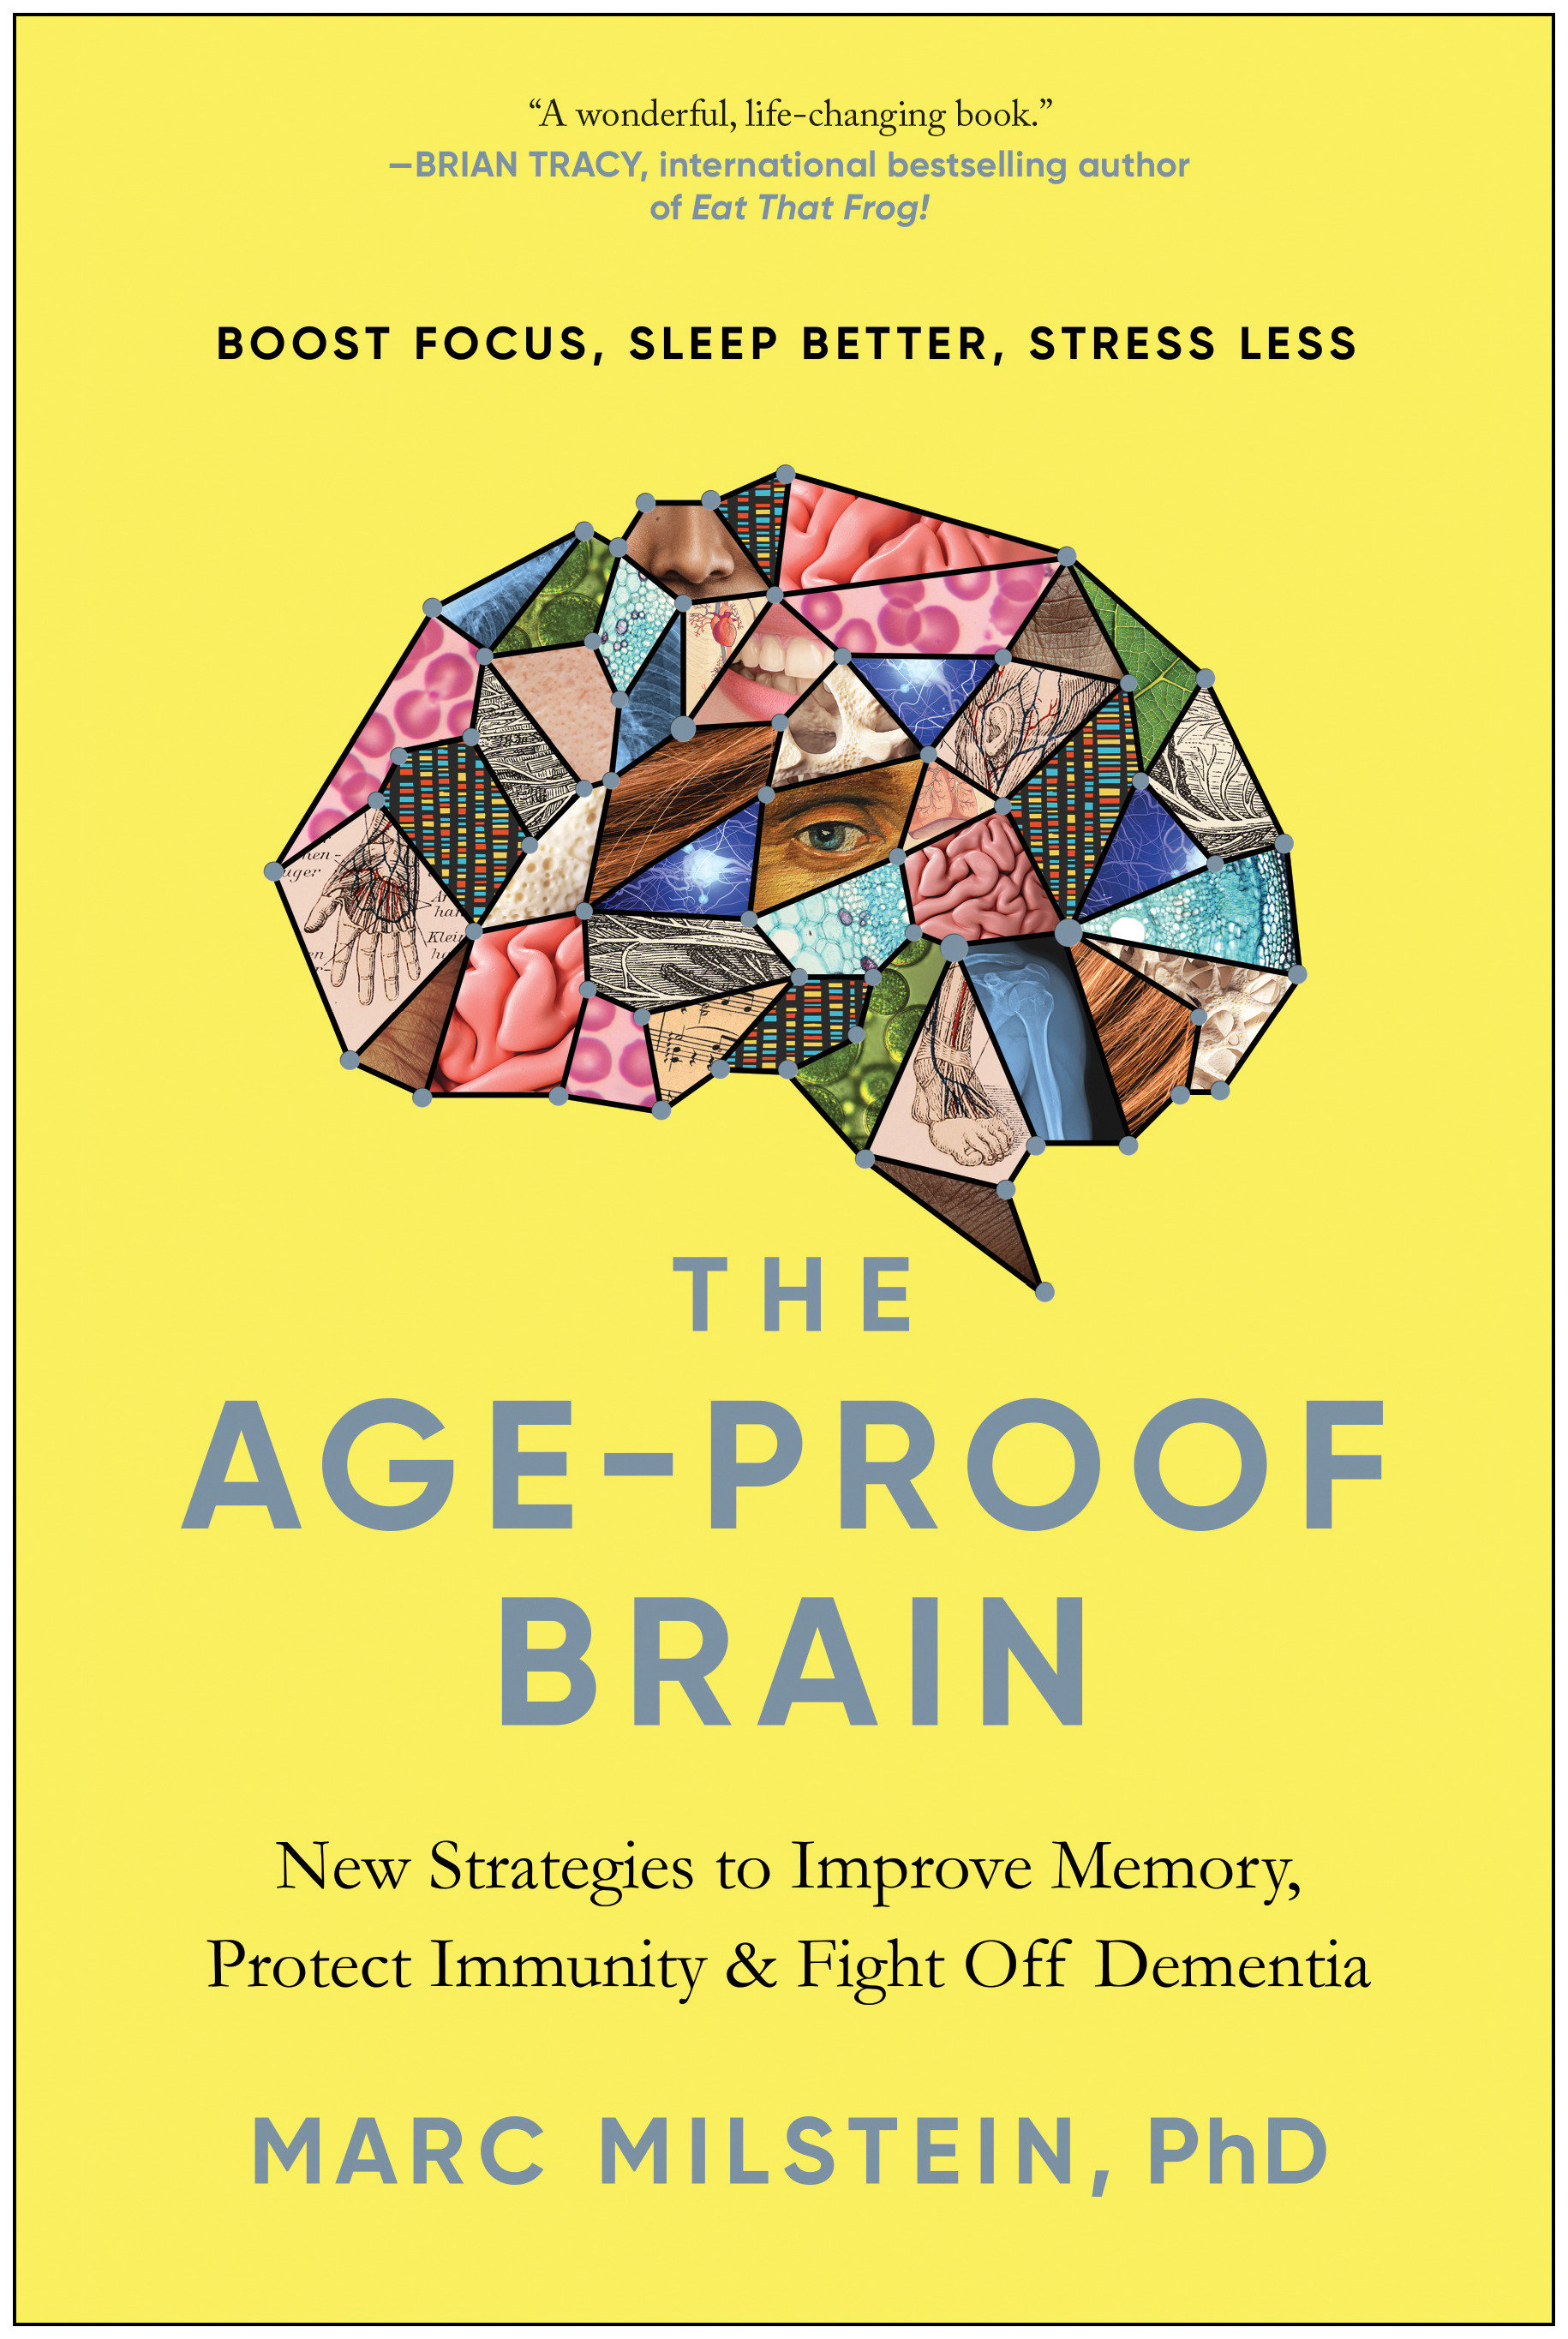 The Age-Proof Brain New Strategies to Improve Memory, Protect Immunity, and Fight Off Dementia